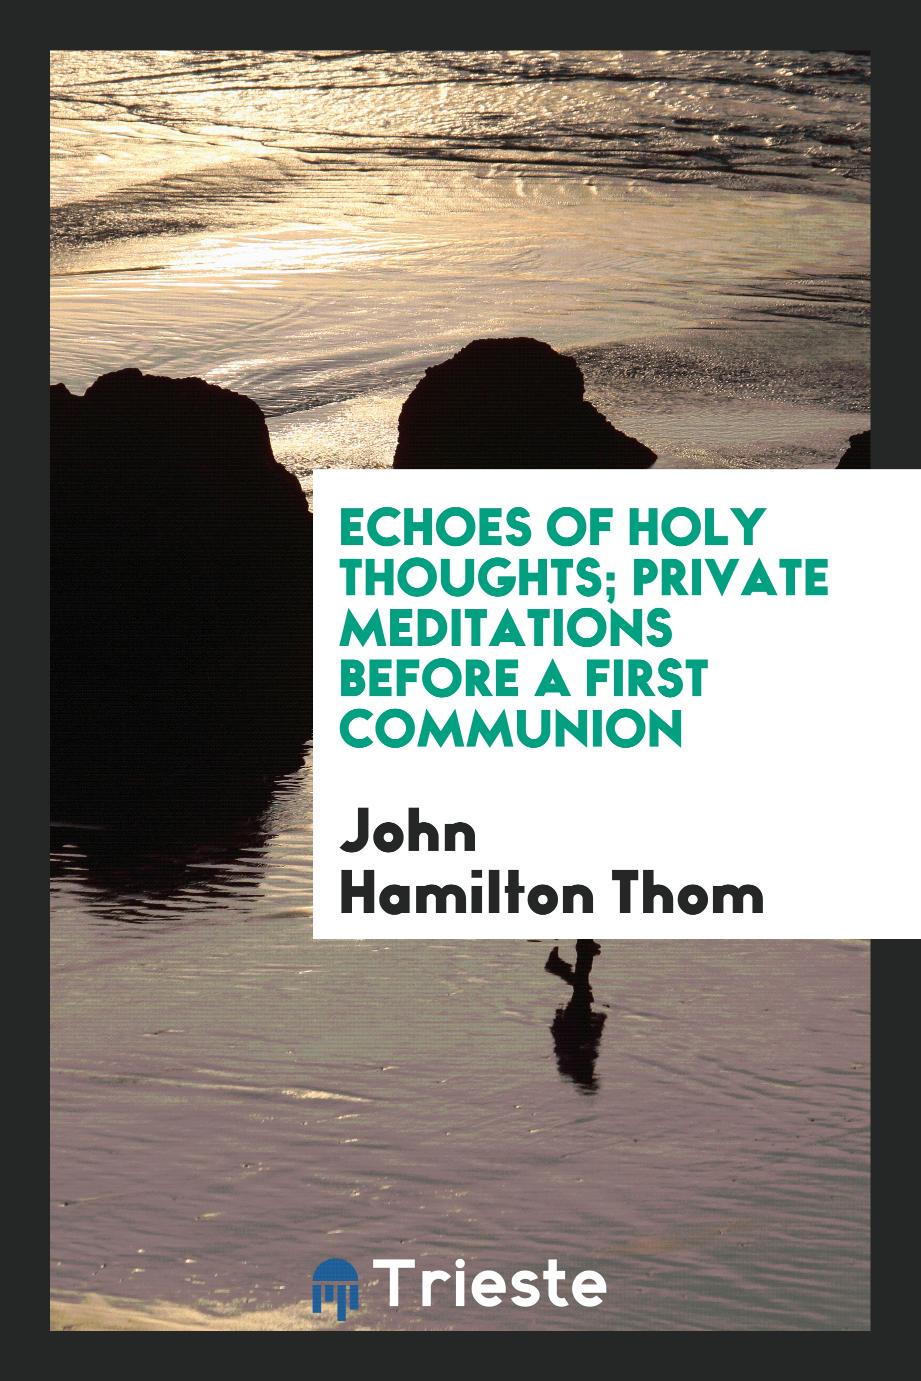 Echoes of holy thoughts; private meditations before a first communion